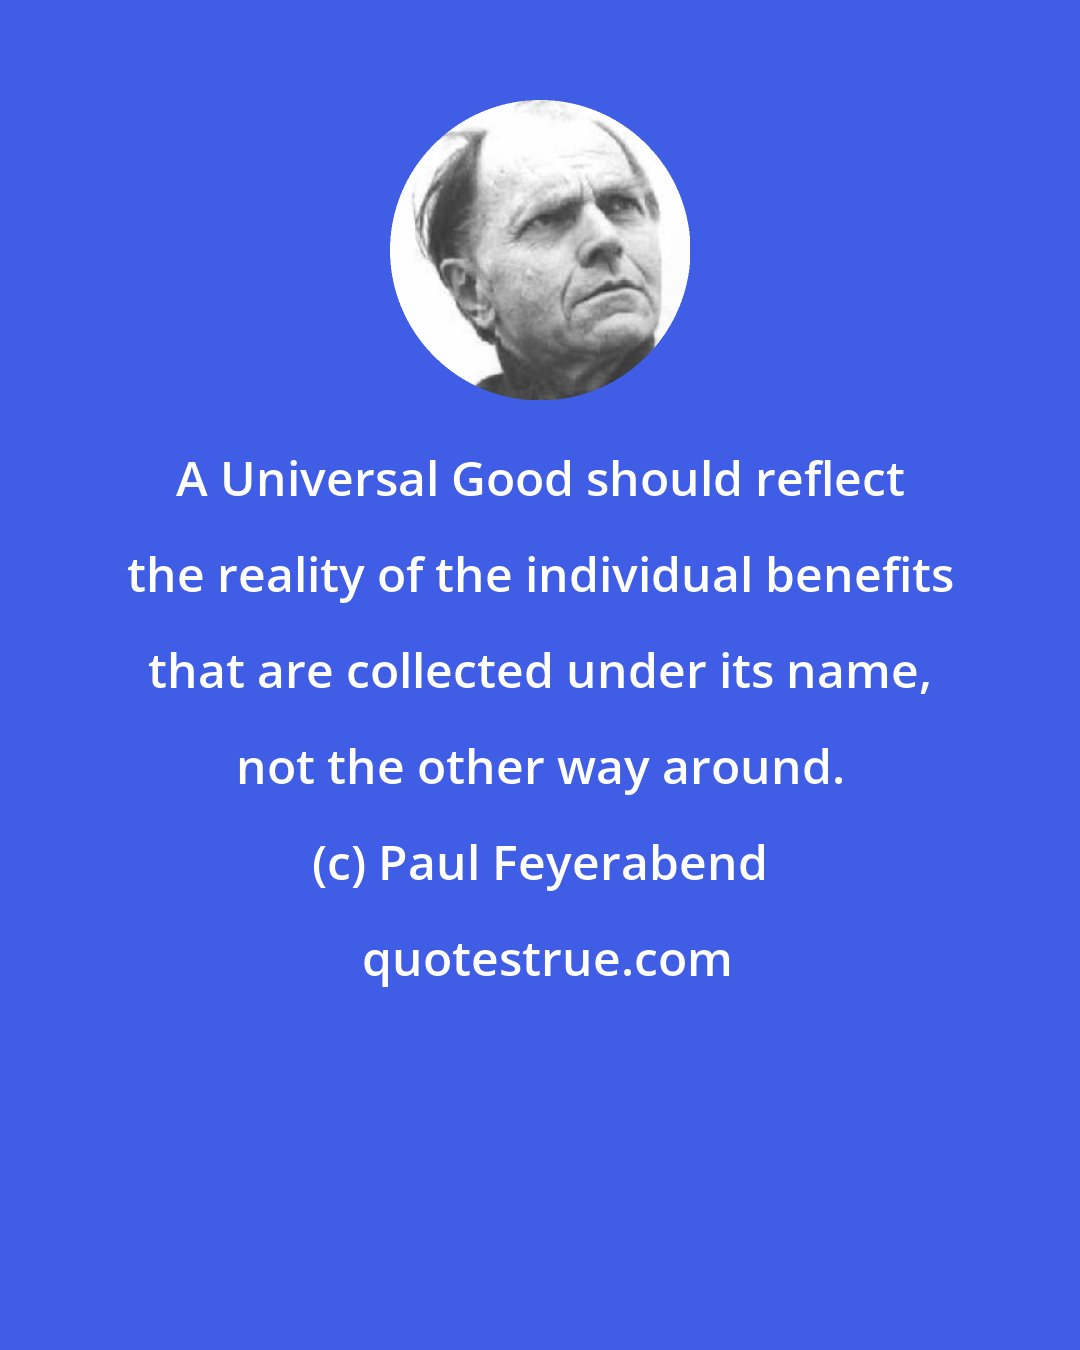 Paul Feyerabend: A Universal Good should reflect the reality of the individual benefits that are collected under its name, not the other way around.